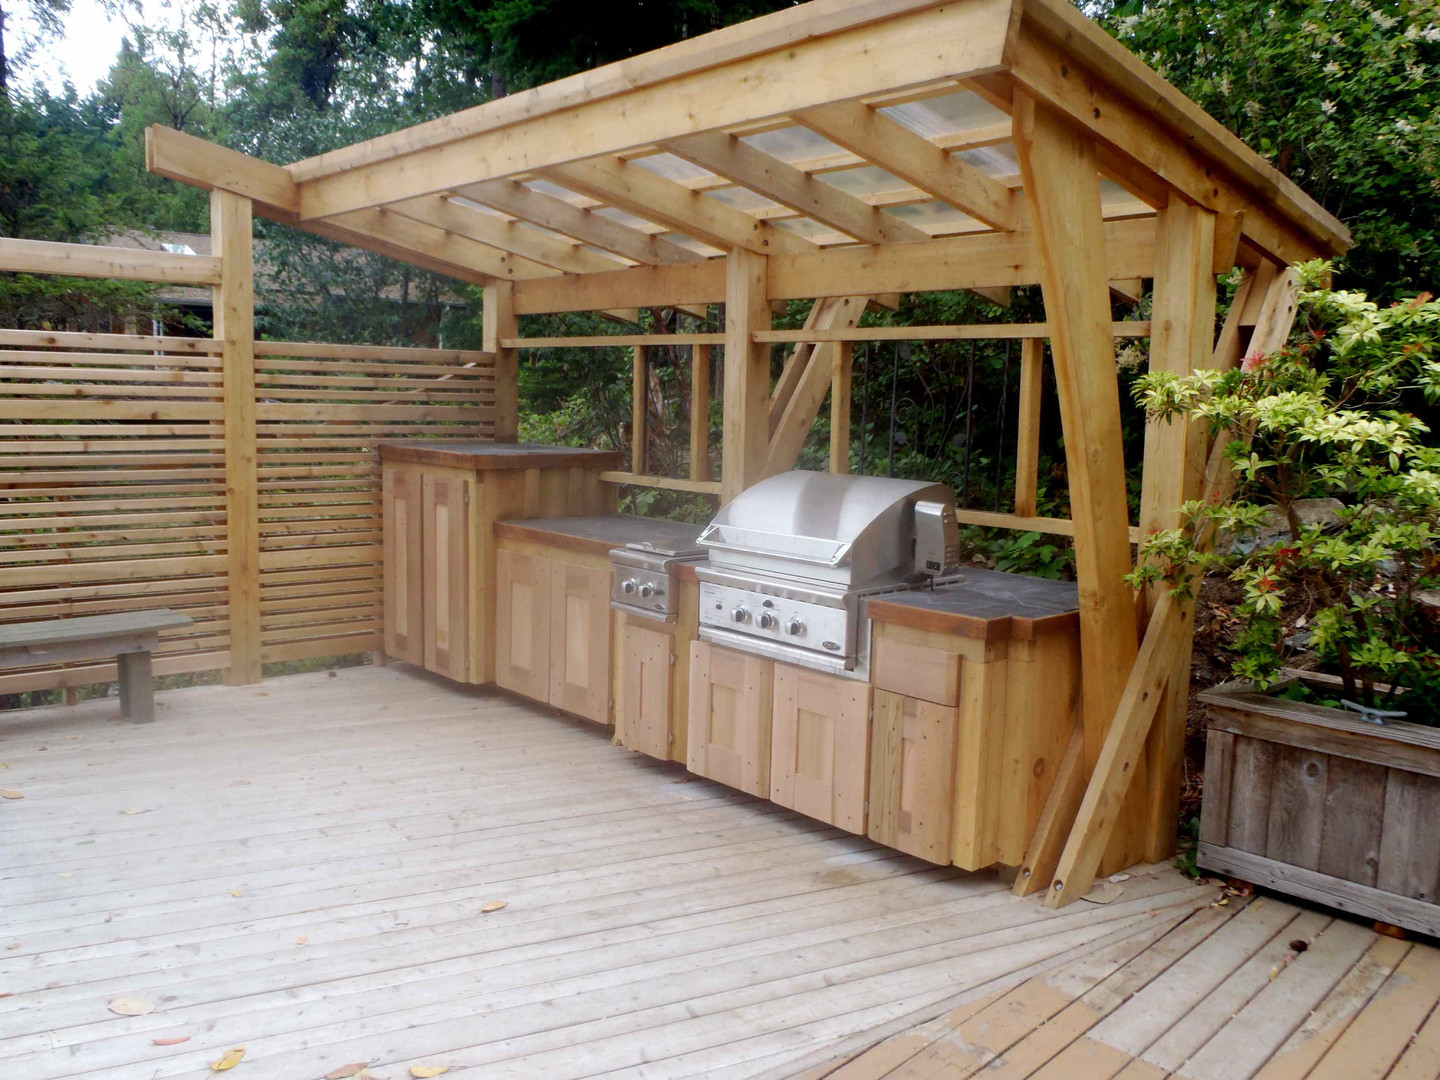 Outdoor Kitchen Designs DIY
 These DIY Outdoor Kitchen Plans Turn Your Backyard Into